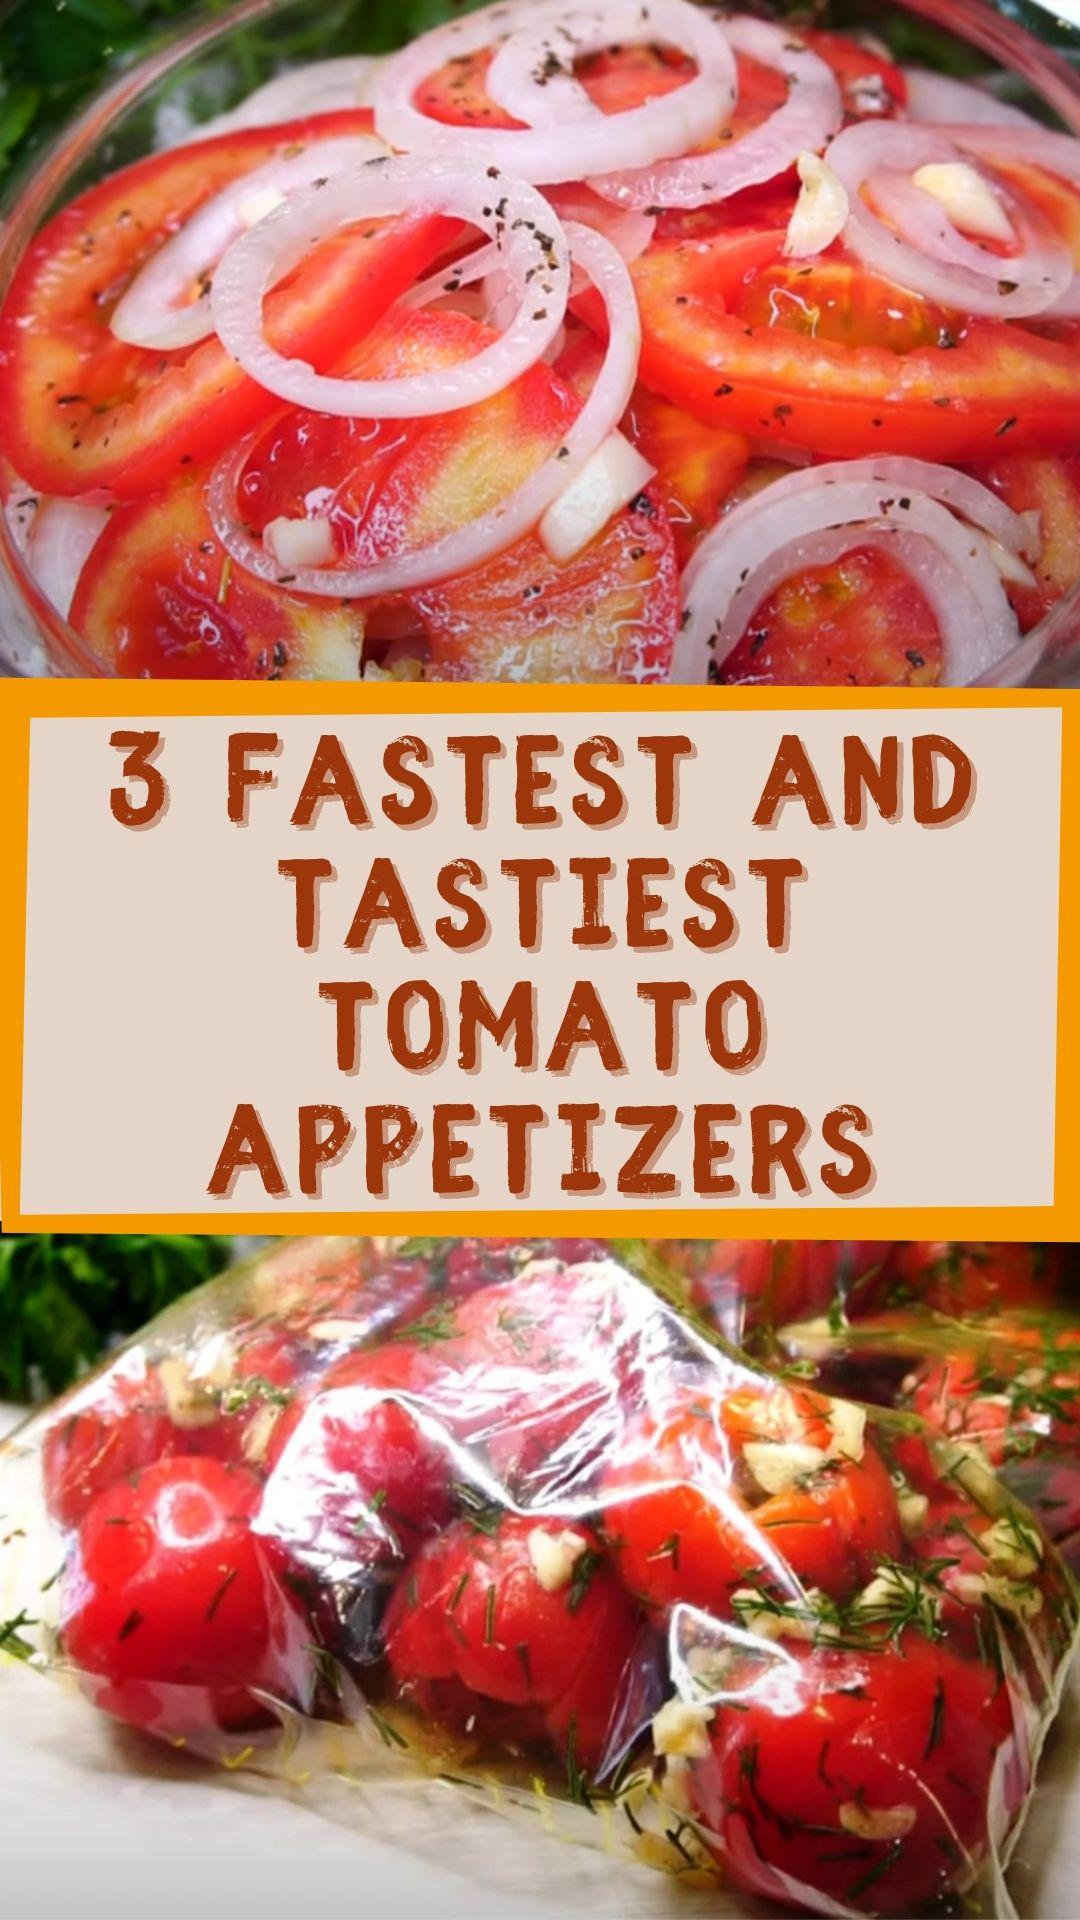 3 fastest and tastiest tomato appetizers